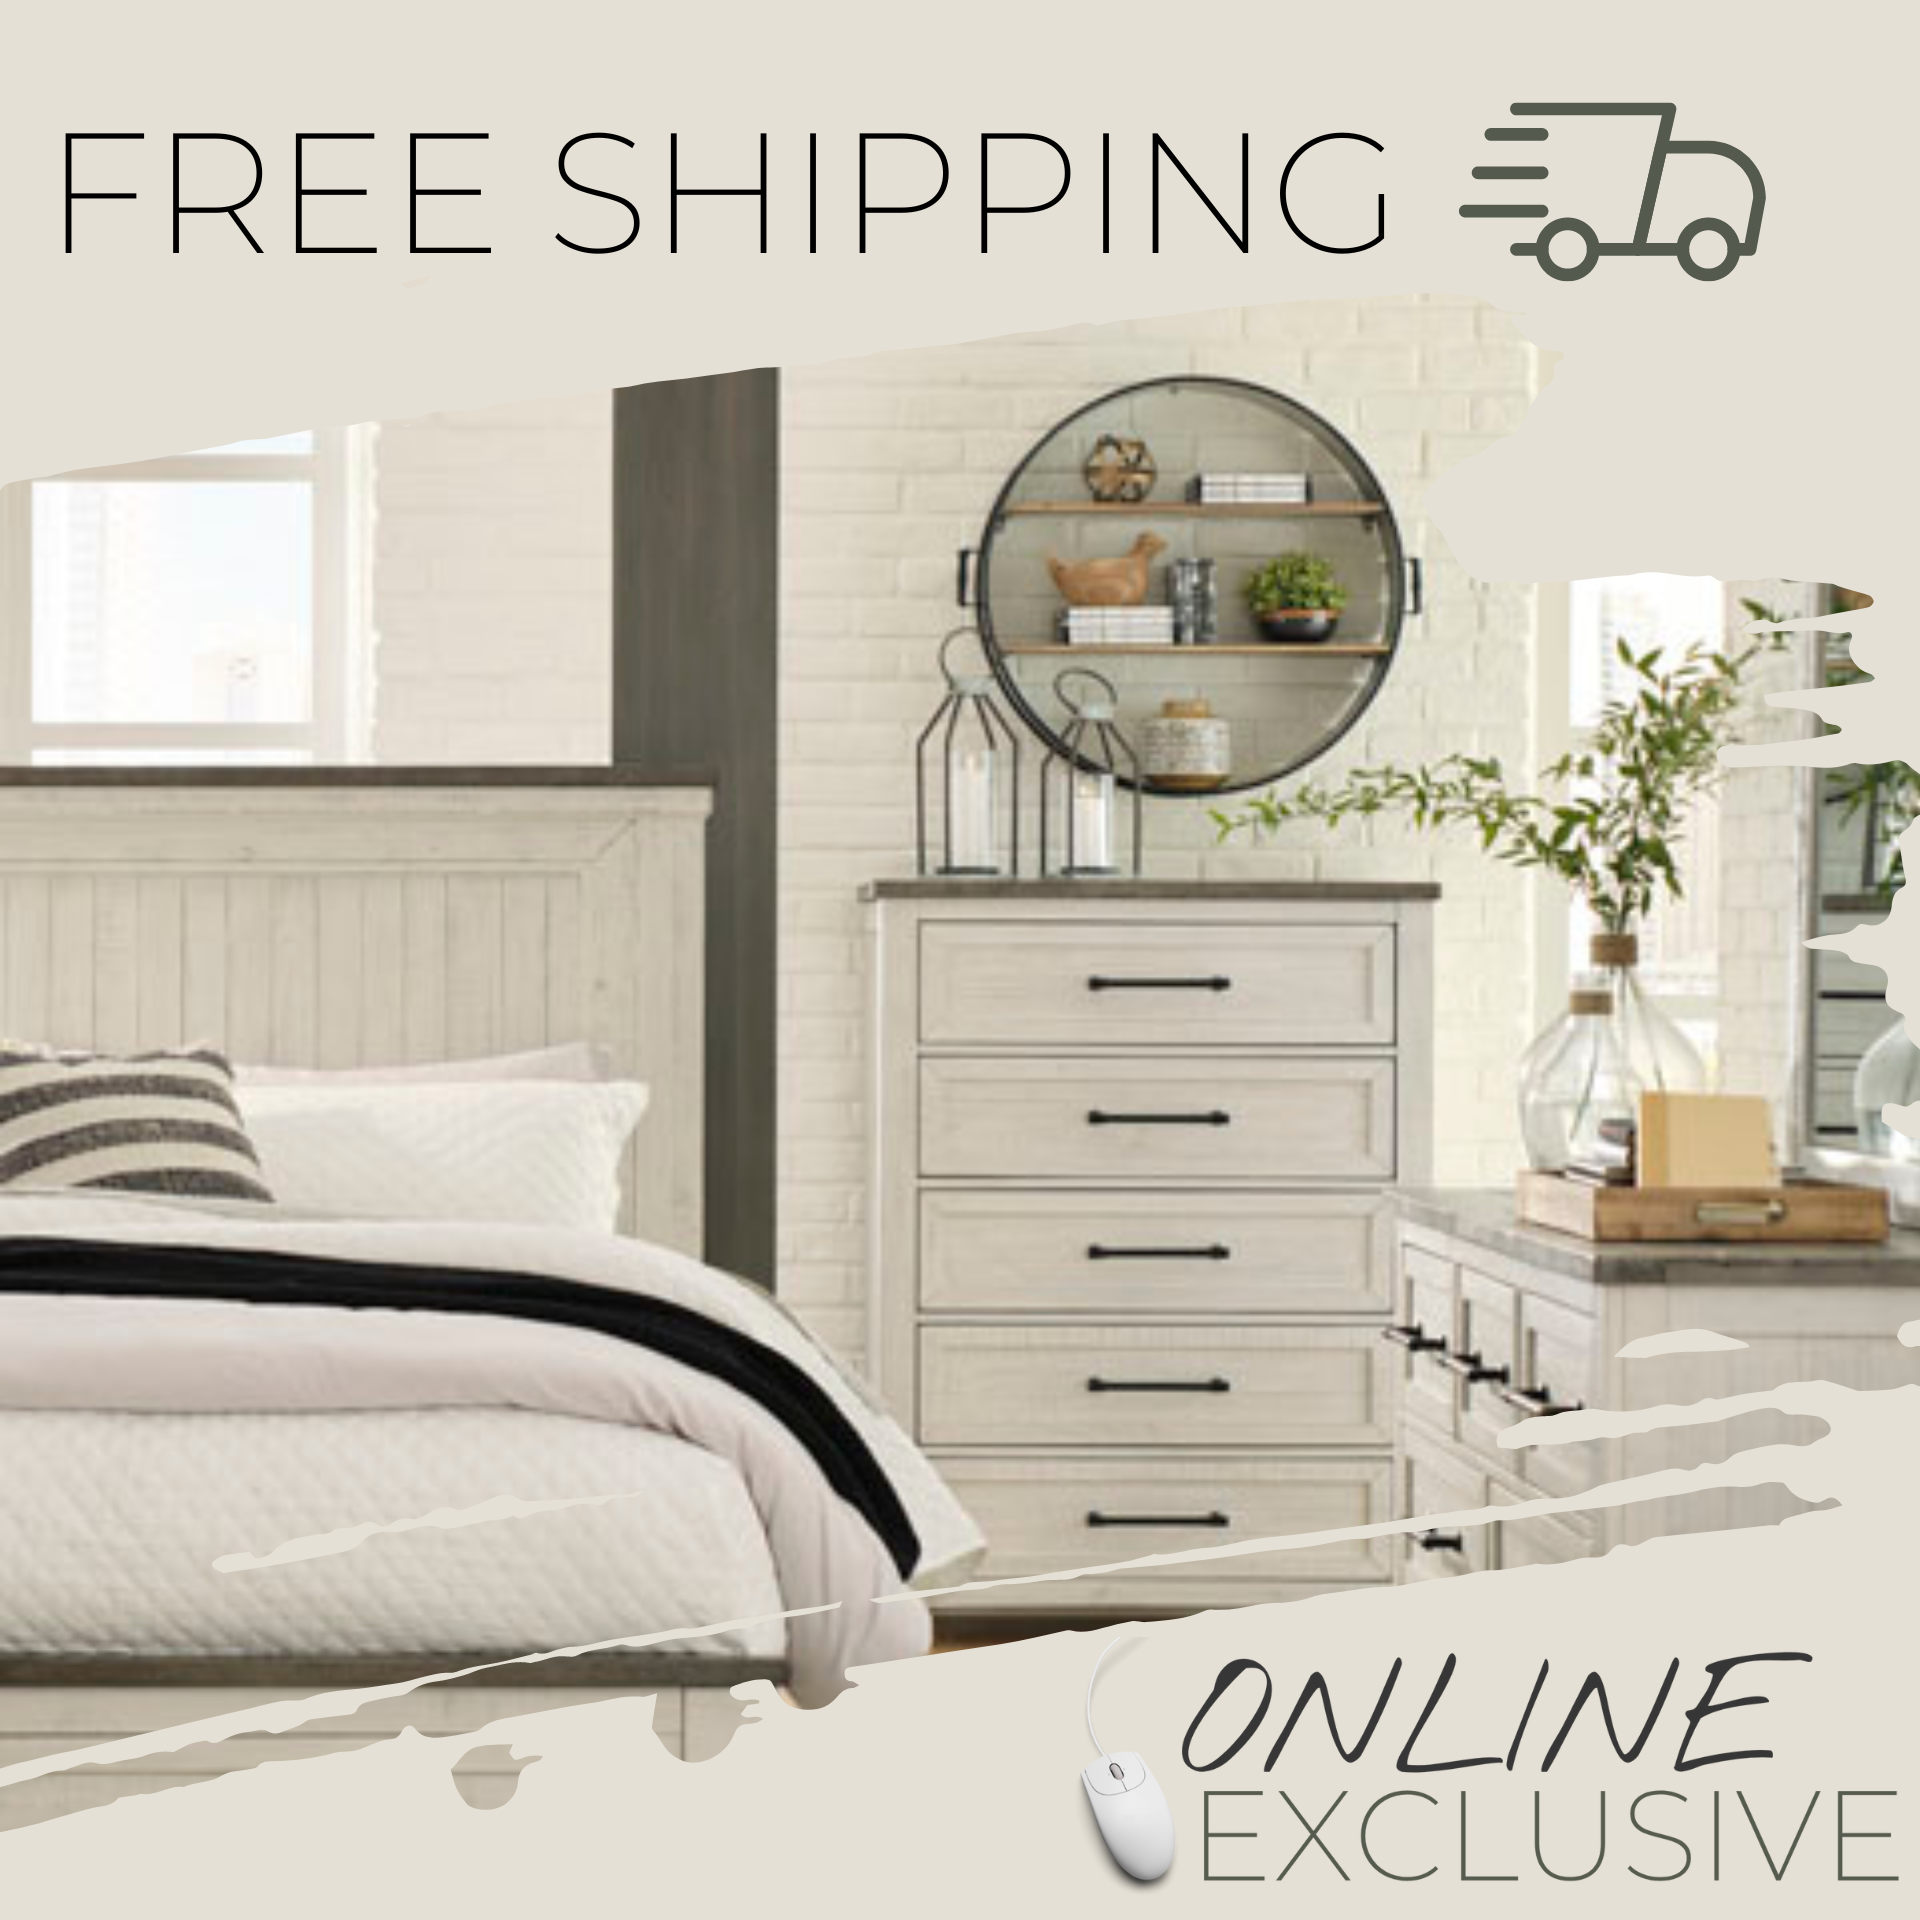 Thousands of items with FREE shipping!